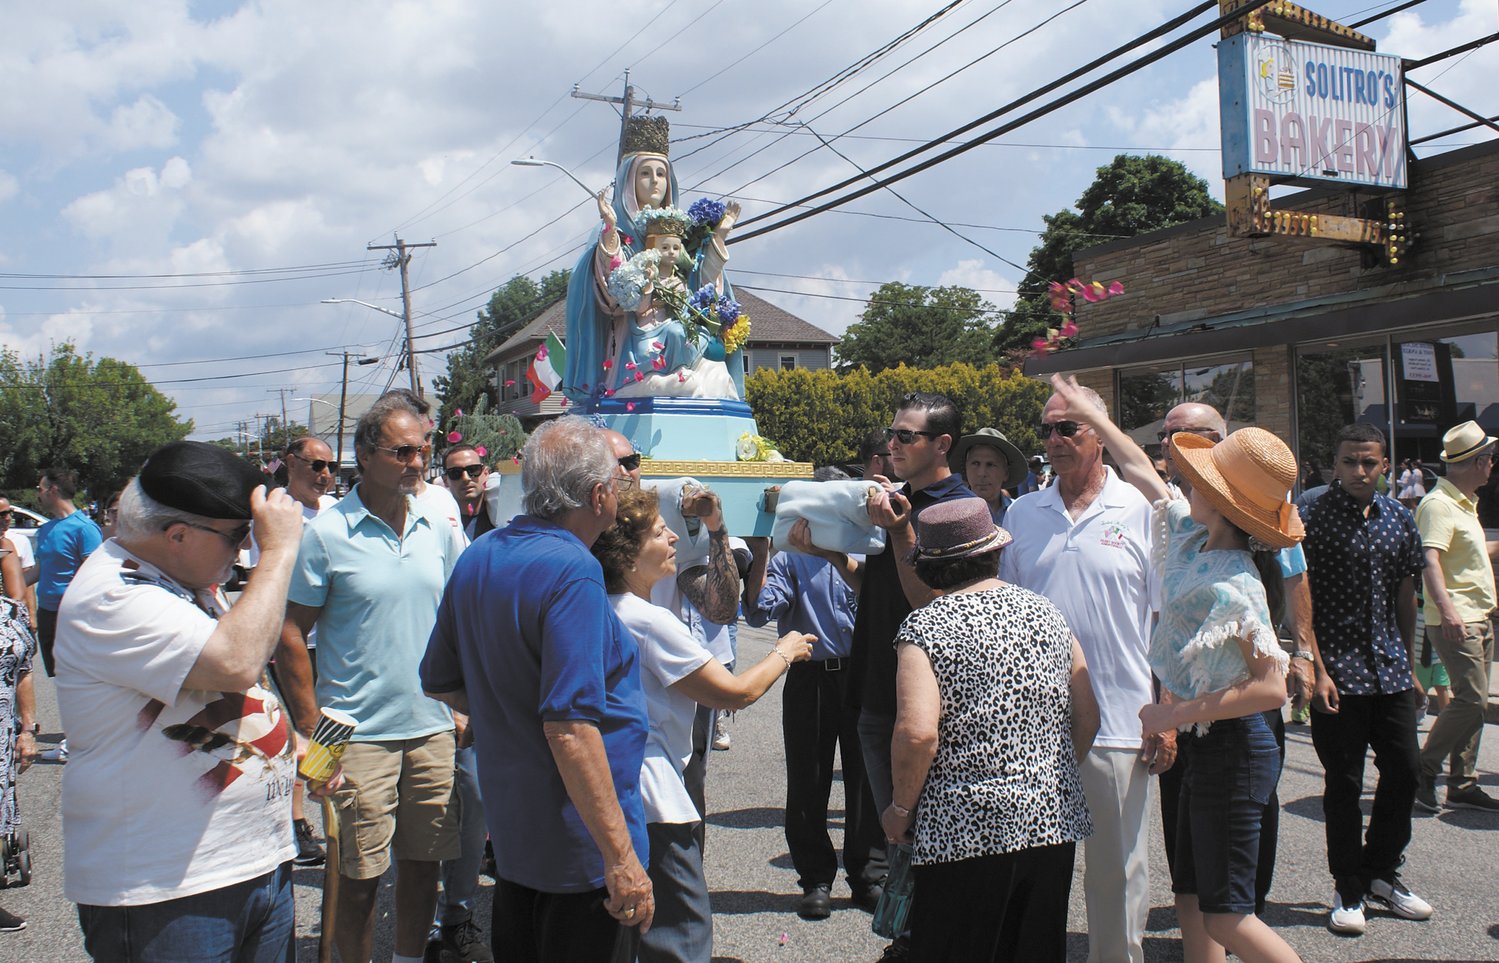 THROWING PETALS: The faithful throw rose petals on the statue of the Madonna as she is carried through the streets of Knightsville on Sunday. (Photo courtesy Steve Popiel)